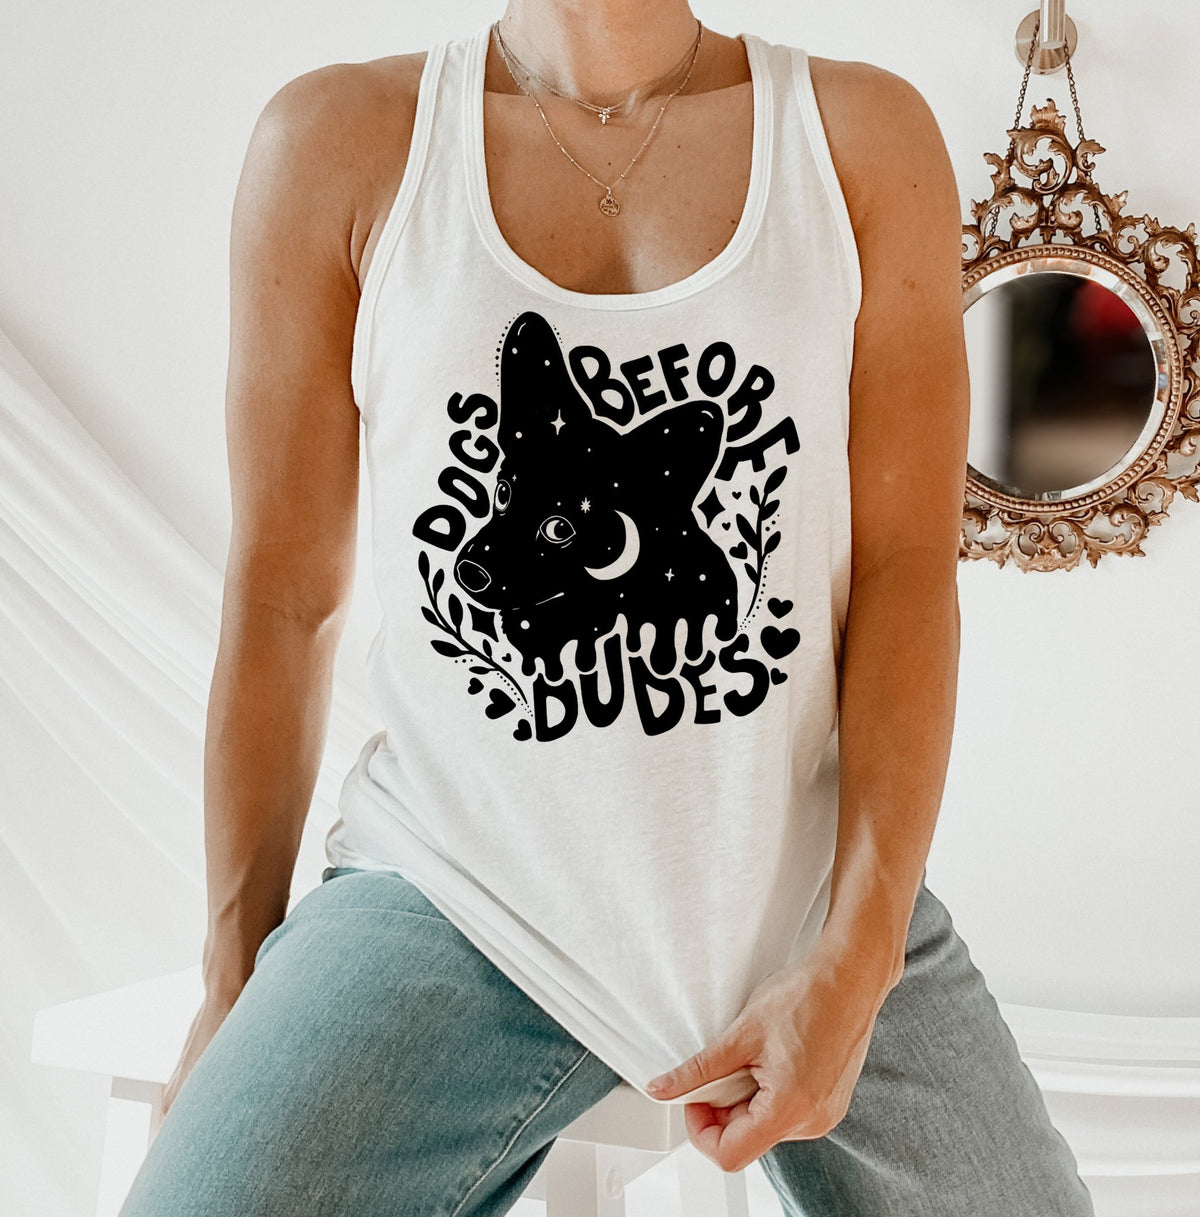 white tank top with a dog that says dogs before dudes - HighCitigrey hoodie with a dog that says dogs before dudes - HighCiti